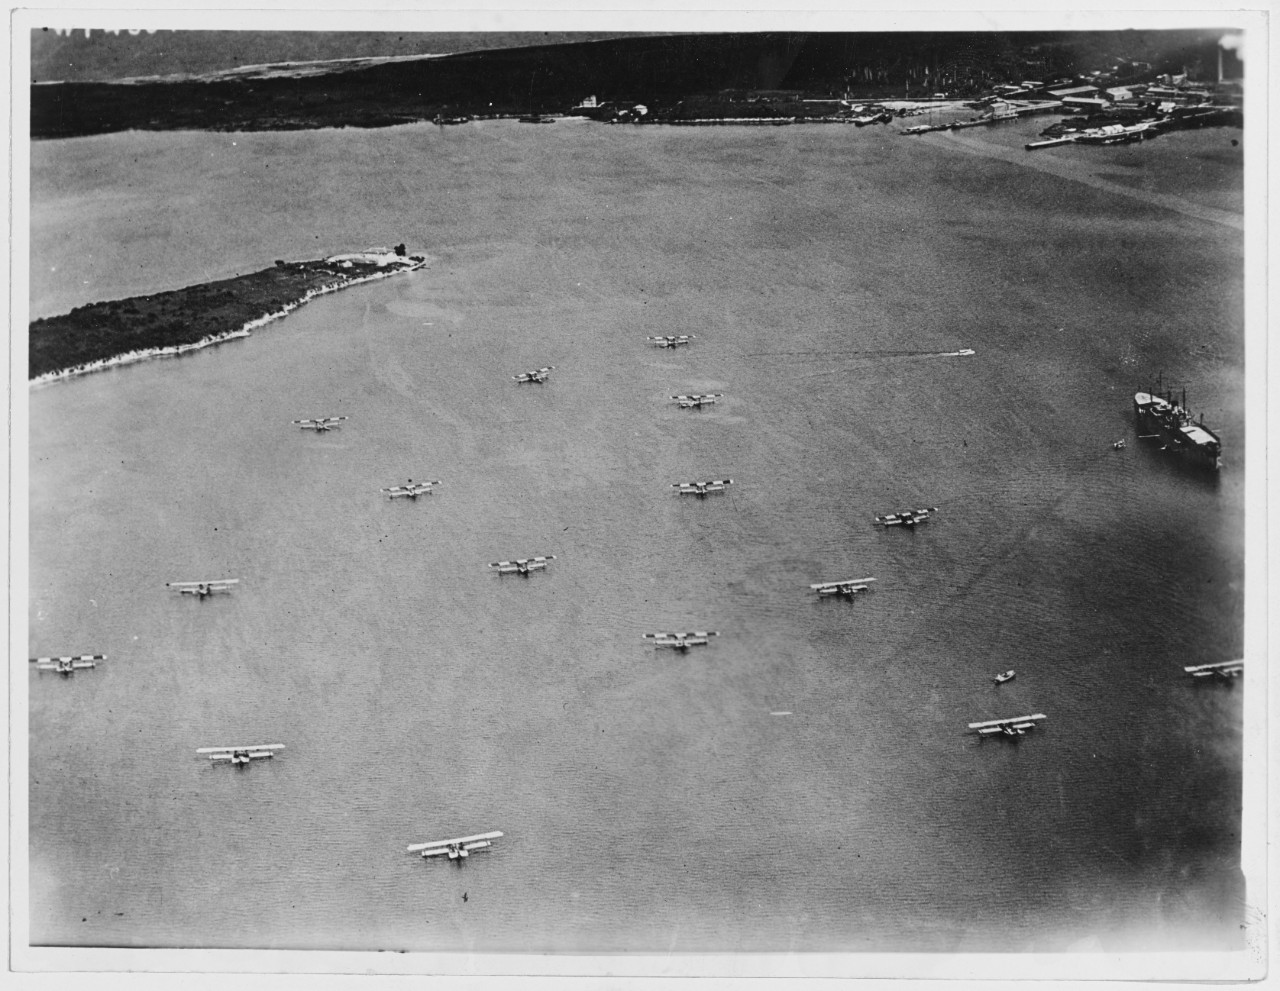 Squadron of Naval Seaplanes at anchor in the harbor of Mariel, Cuba